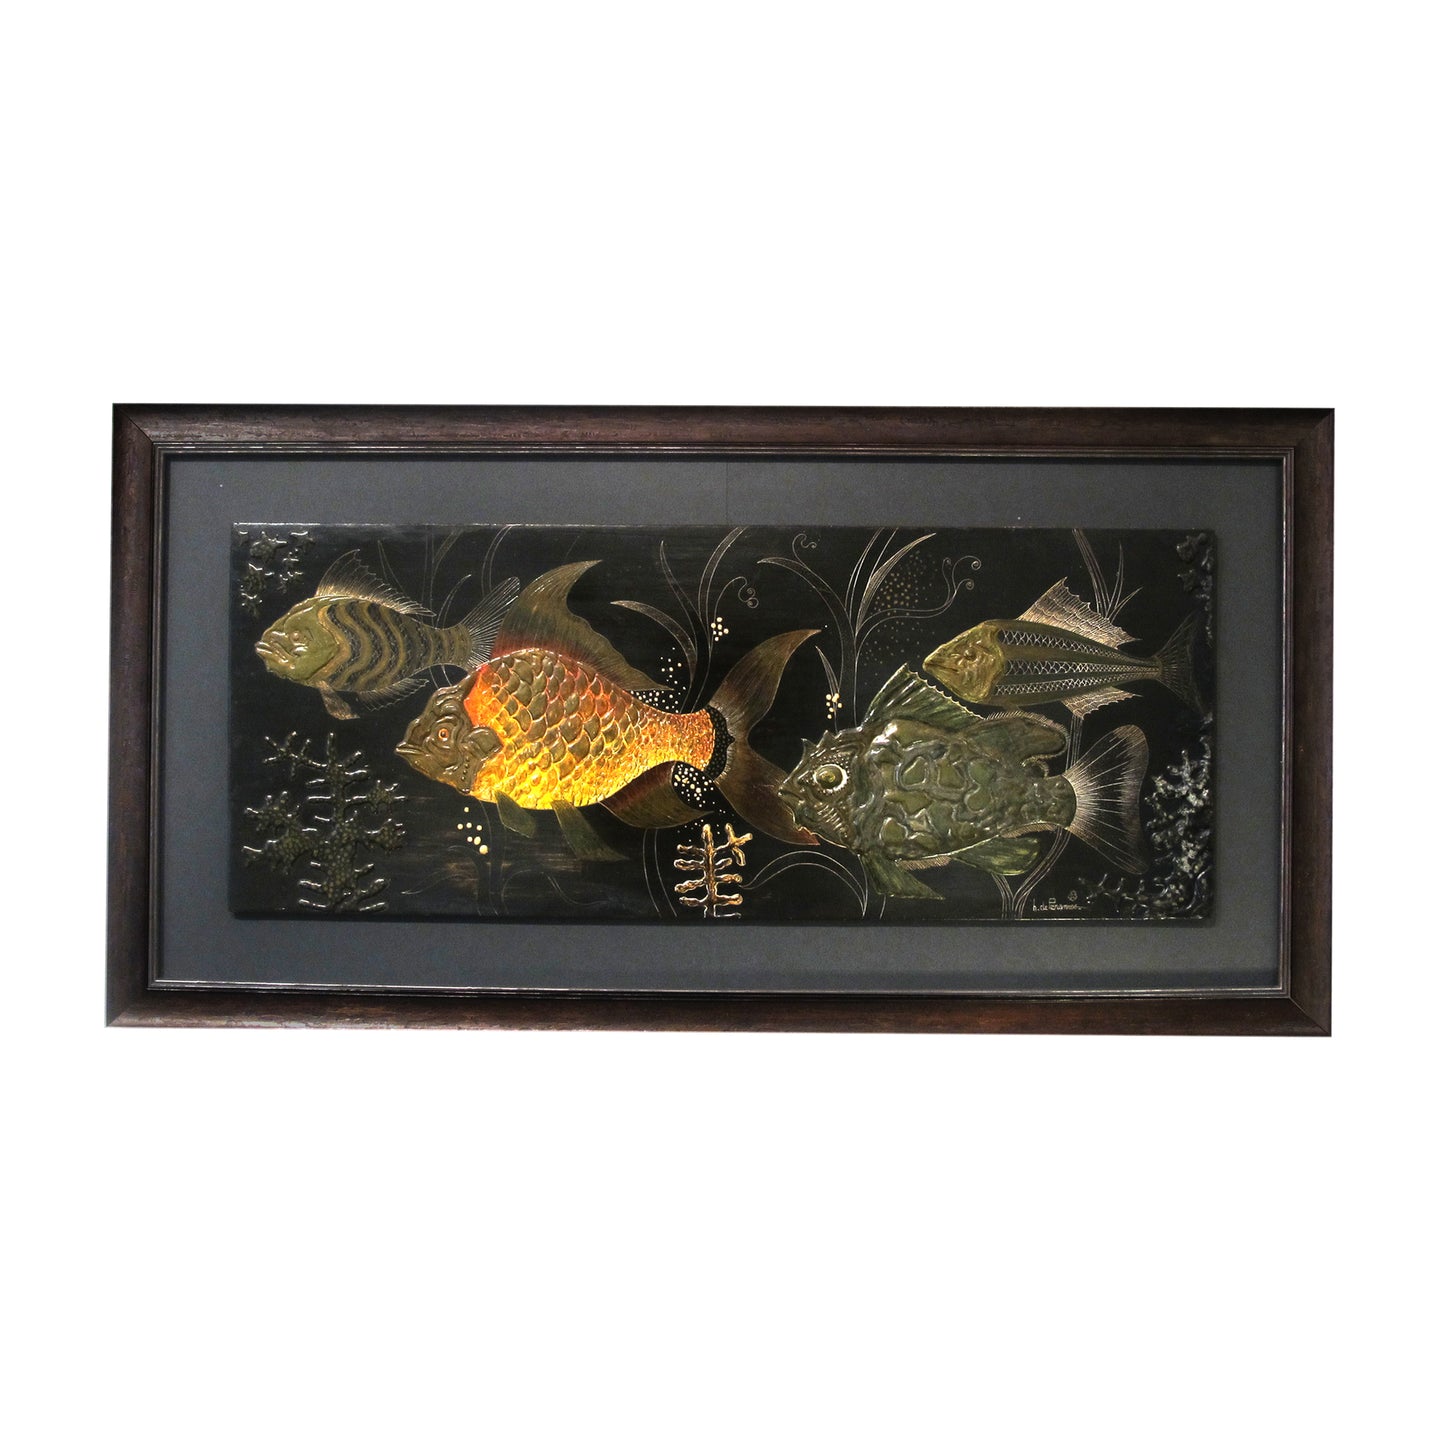 A painted wall plaster relief of fish under water by H. De Penanros